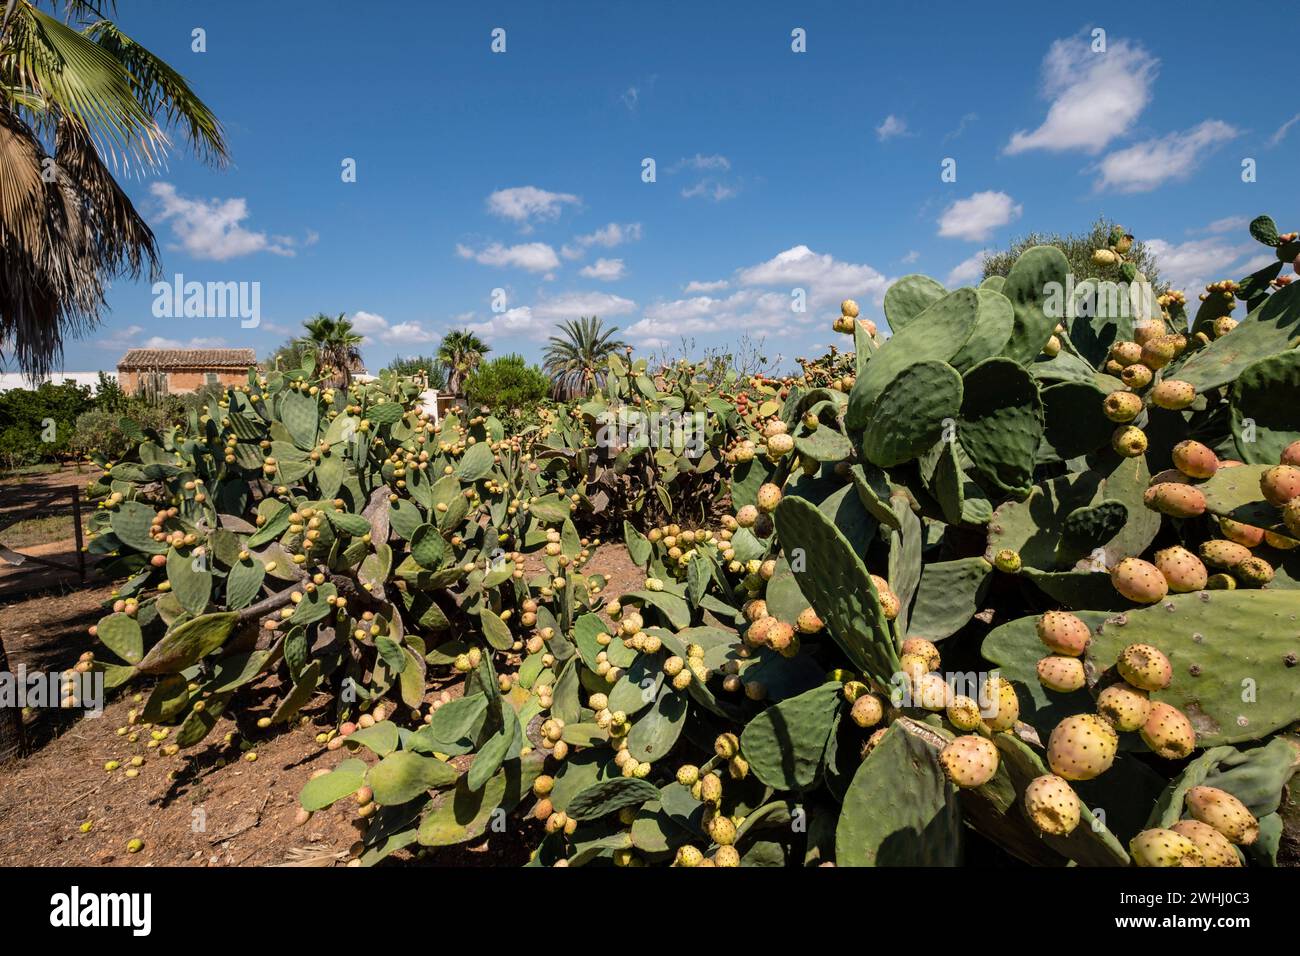 Prickly pears with ripe fruits Stock Photo